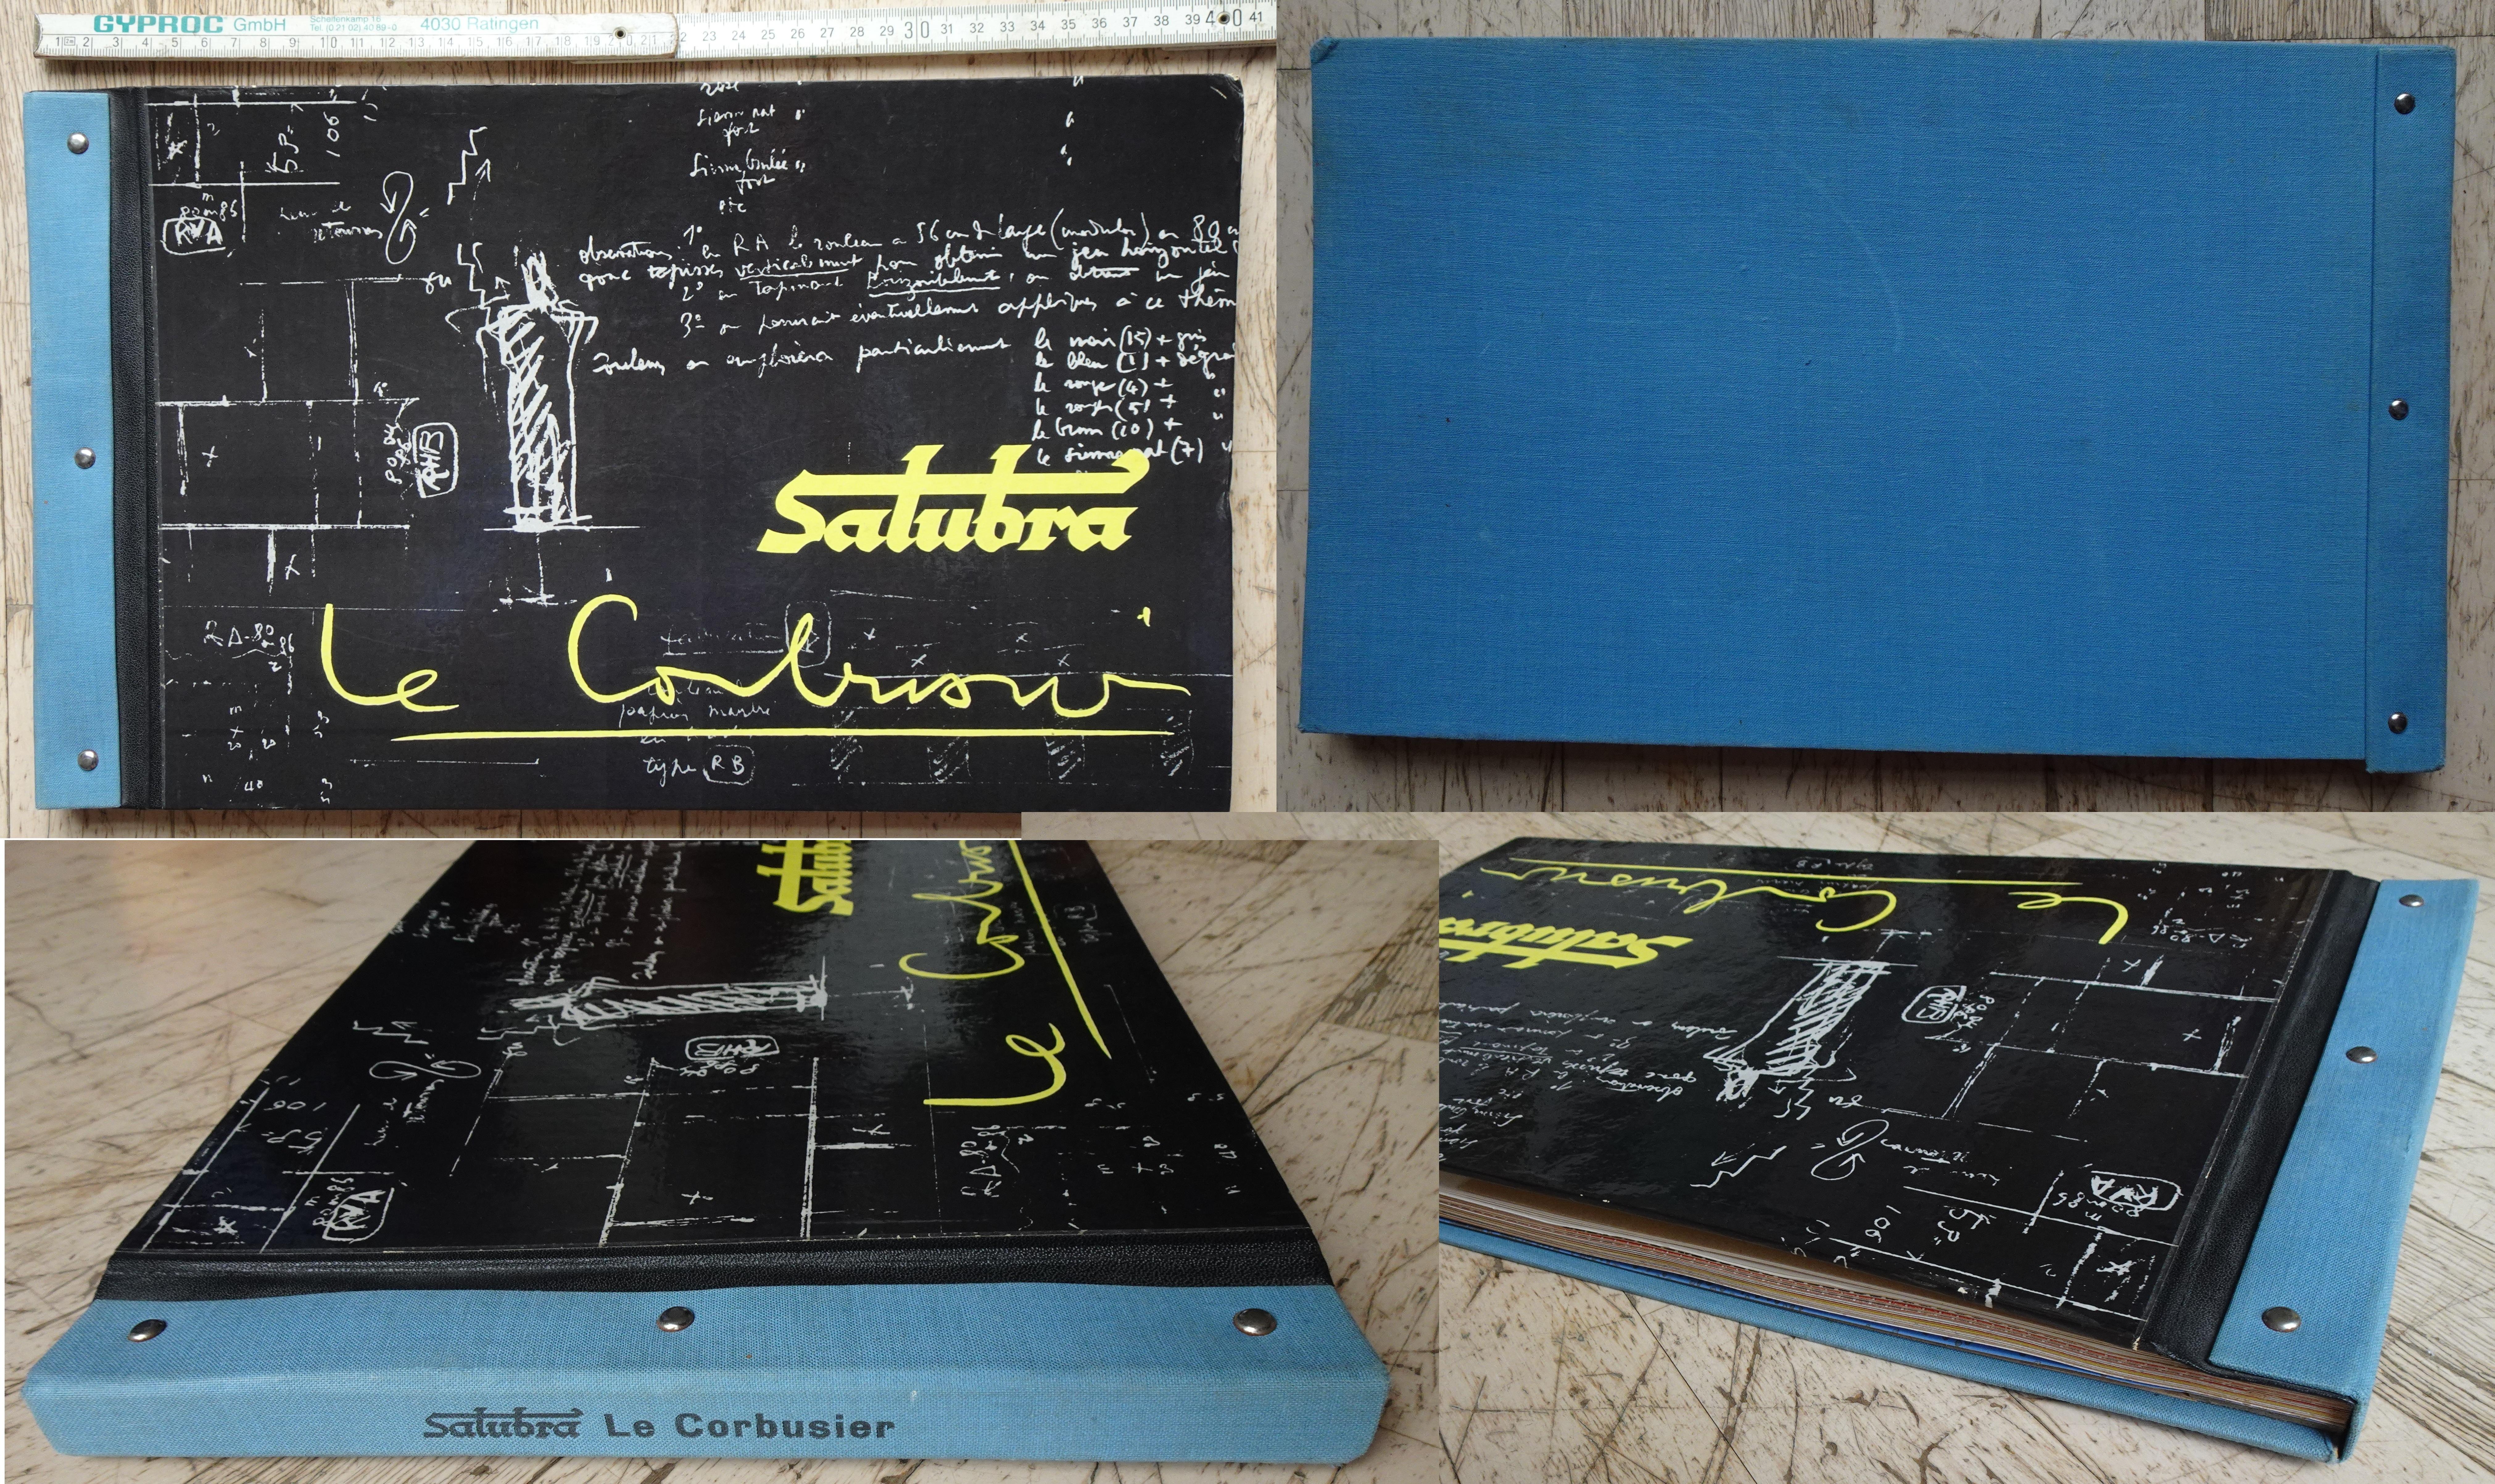 Second Salubra collection by Le Corbusier - 1959

Very rare and collectible.

Original sample book from 1959. With the original movable frames, which can be passed over the color cards.

All pages are shown in the photos, the last photos show the